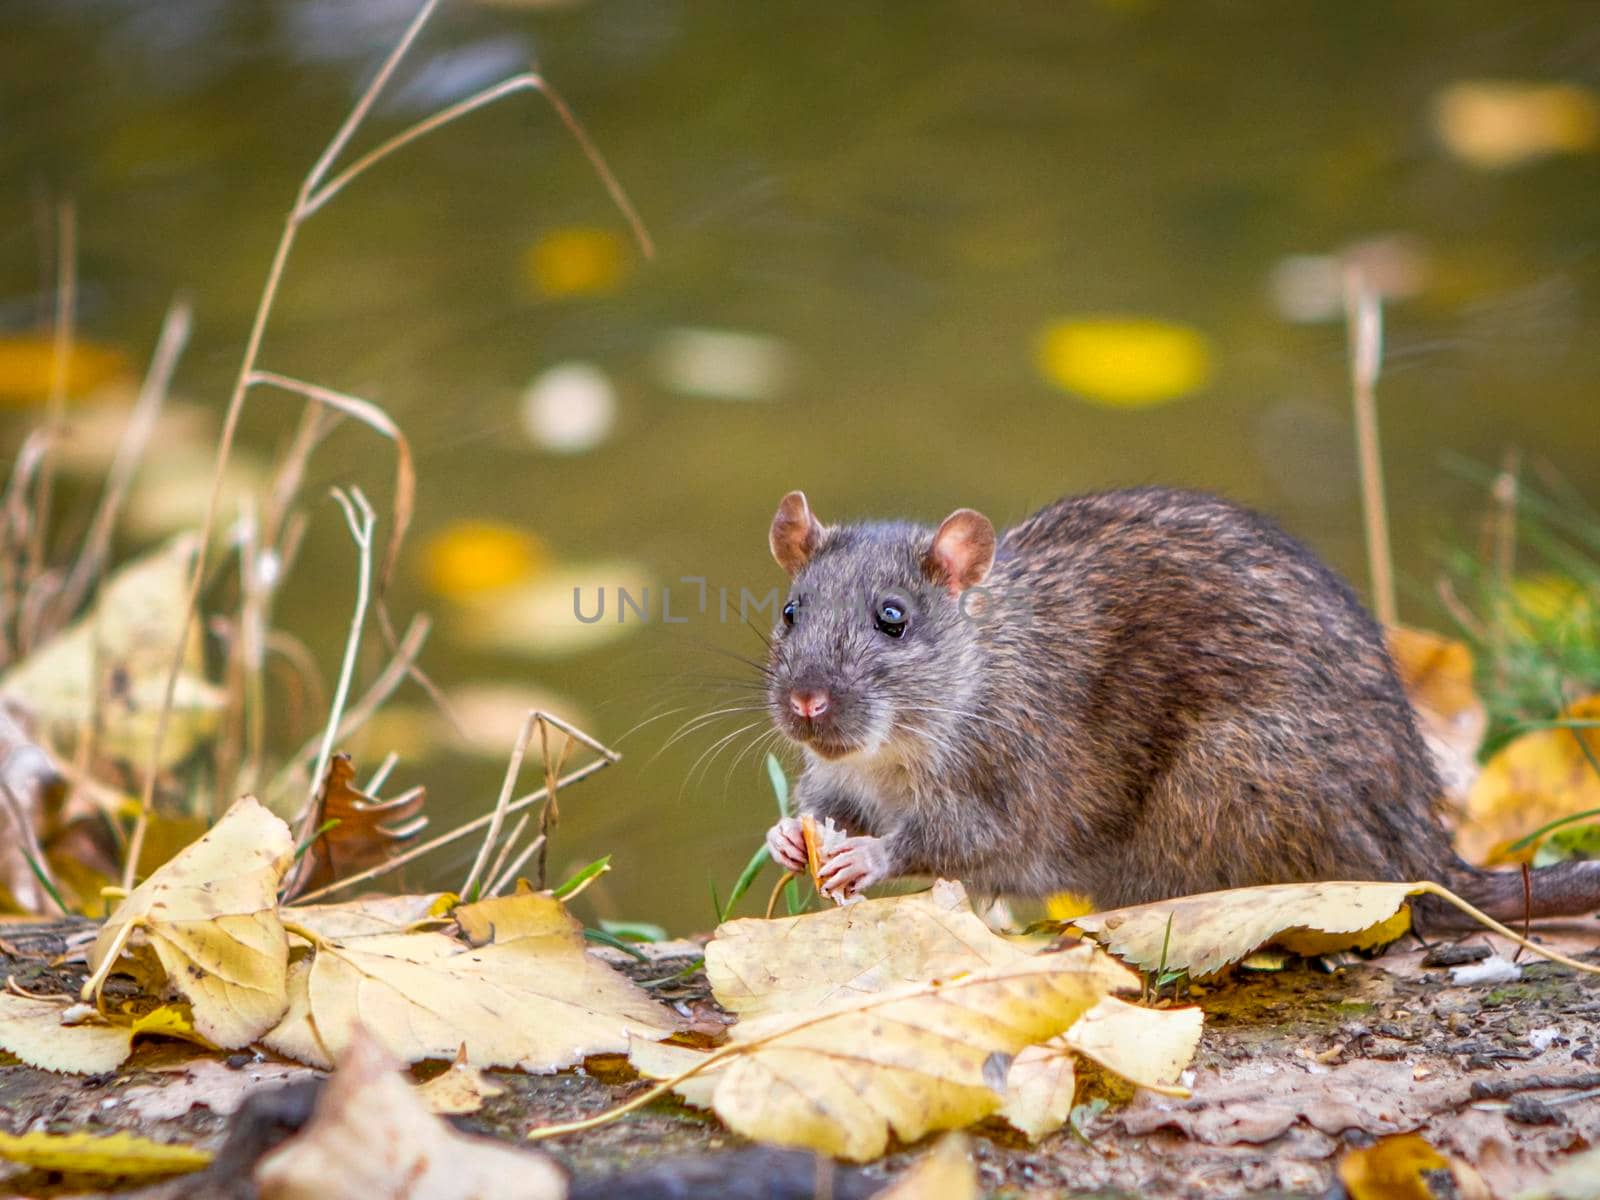 Wild rat eating food in the autumn forest. by Laguna781